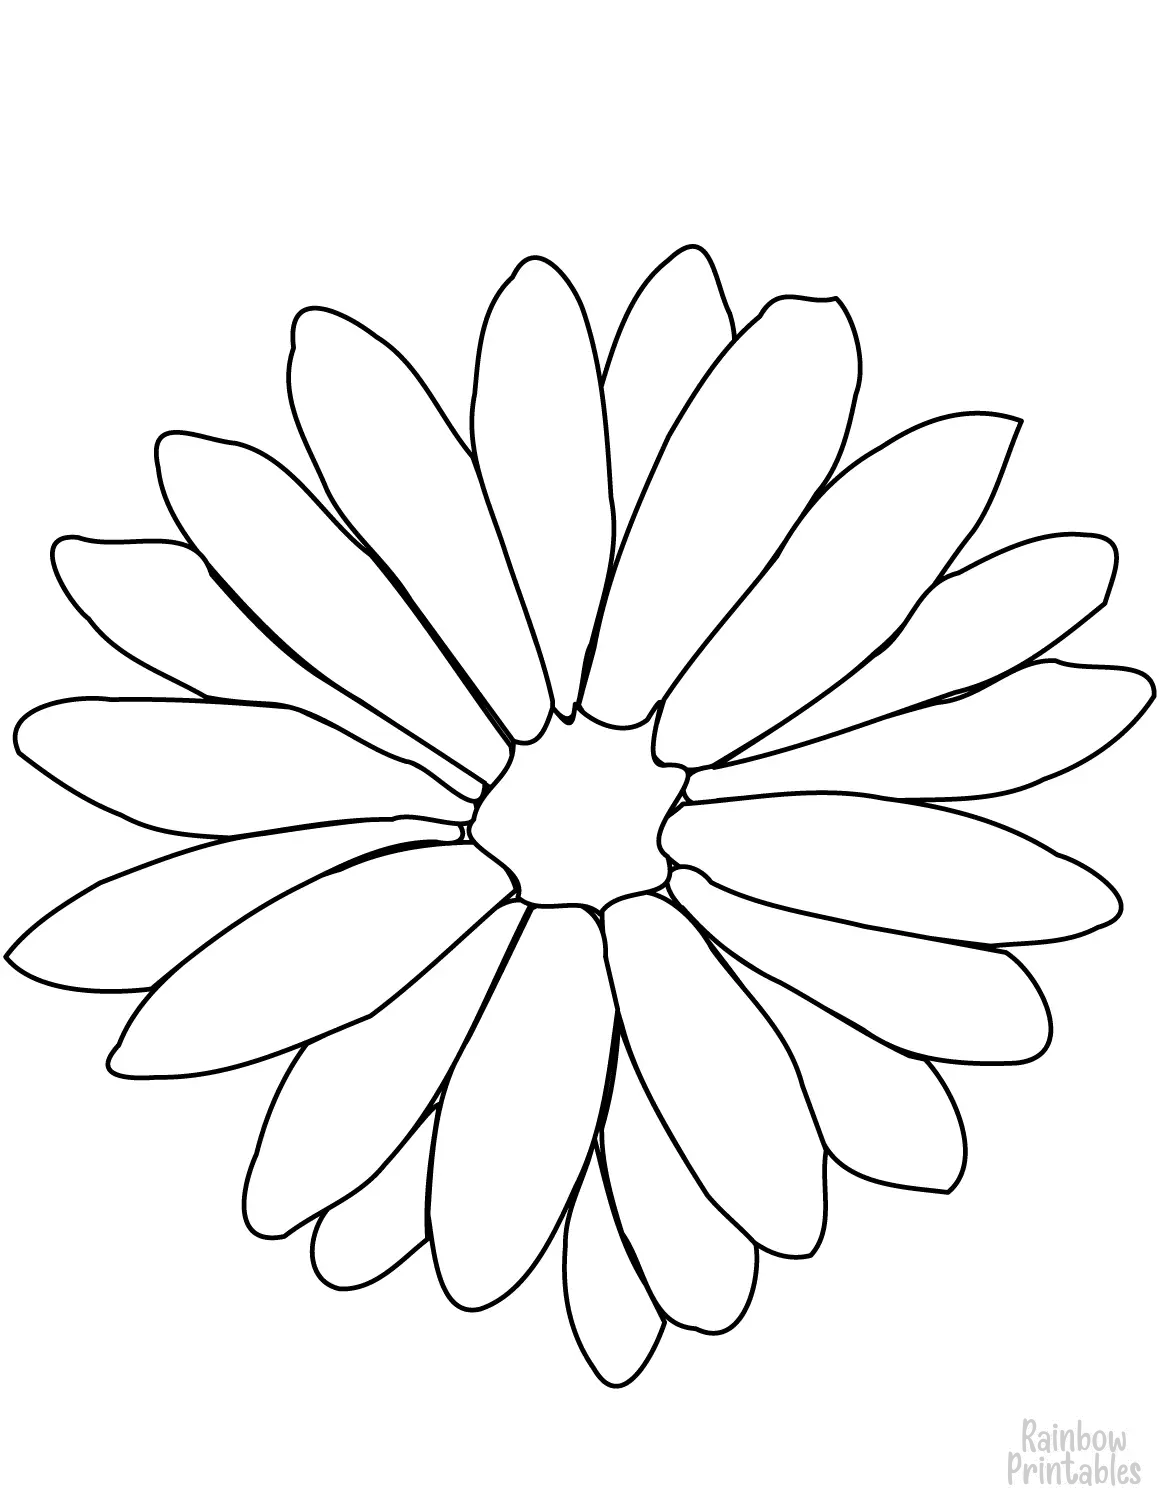 SIMPLE-EASY-line-drawings-chrysanthemum-coloring-page-for-kids Outline